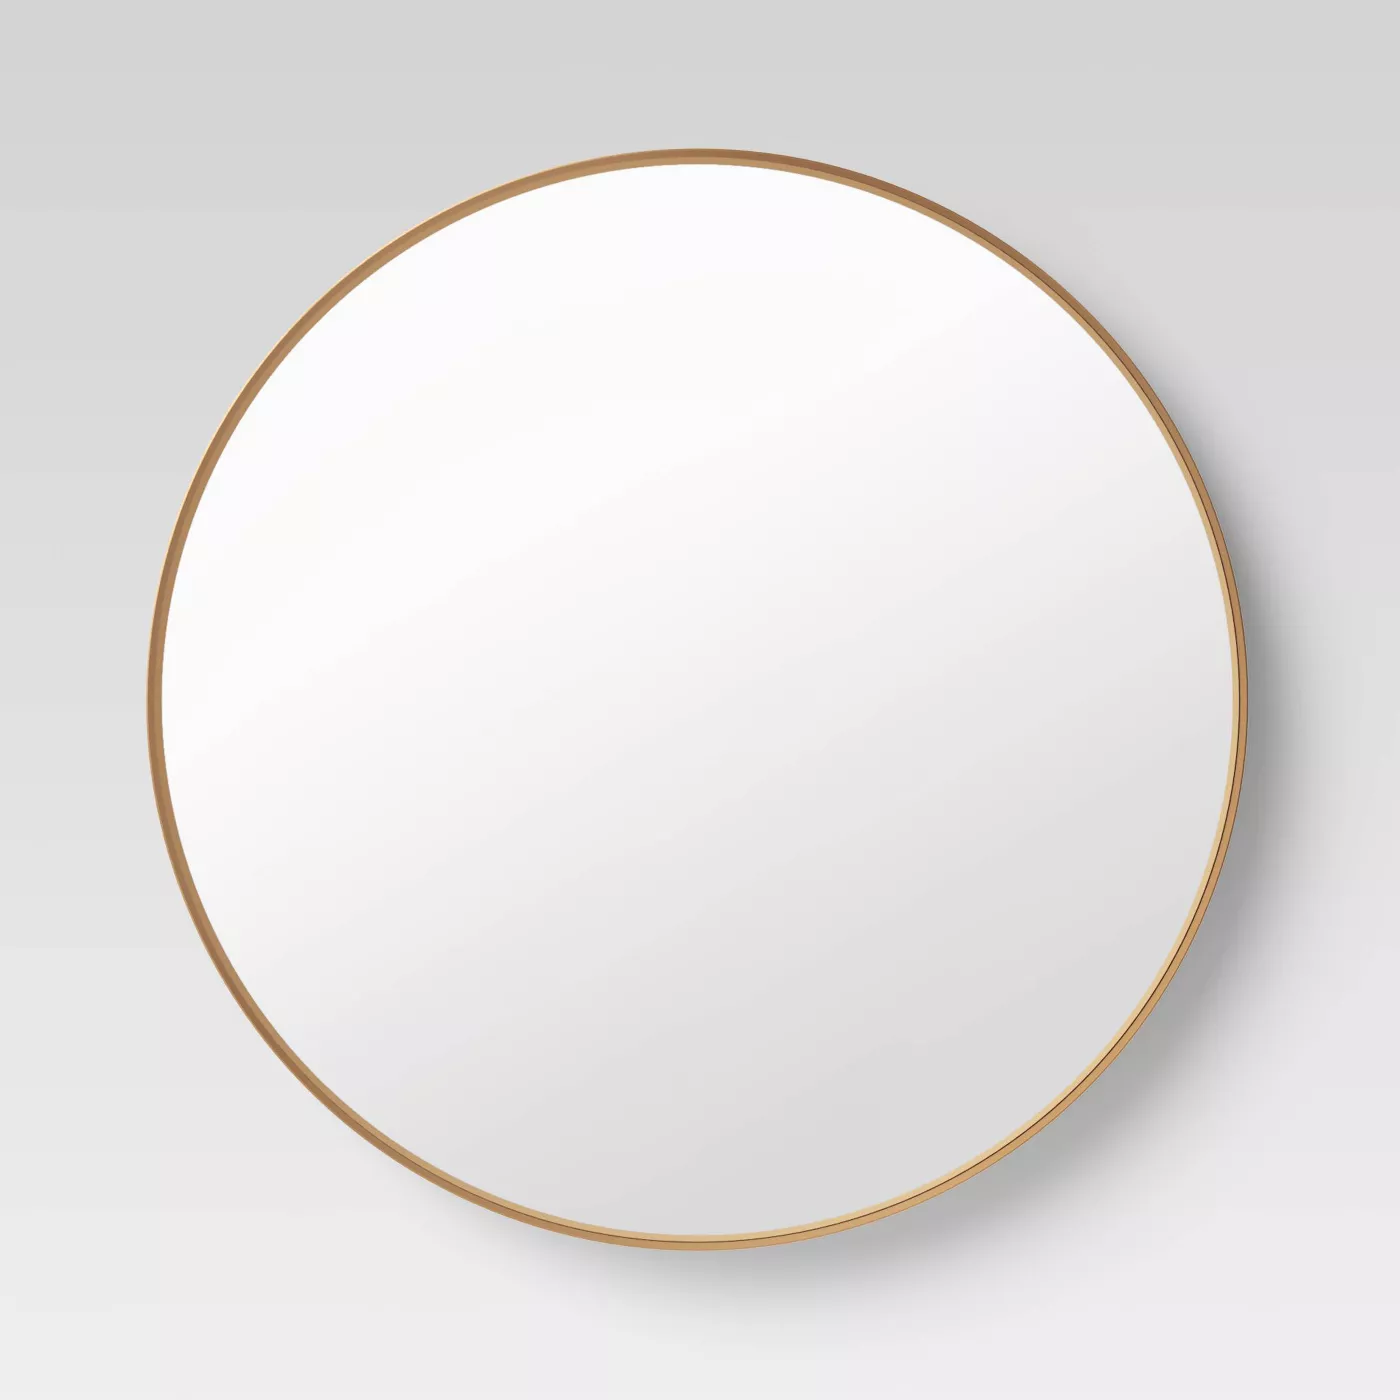 Shop Flush Mount Round Decorative Wall Mirror Gold - Project 62 from Target on Openhaus